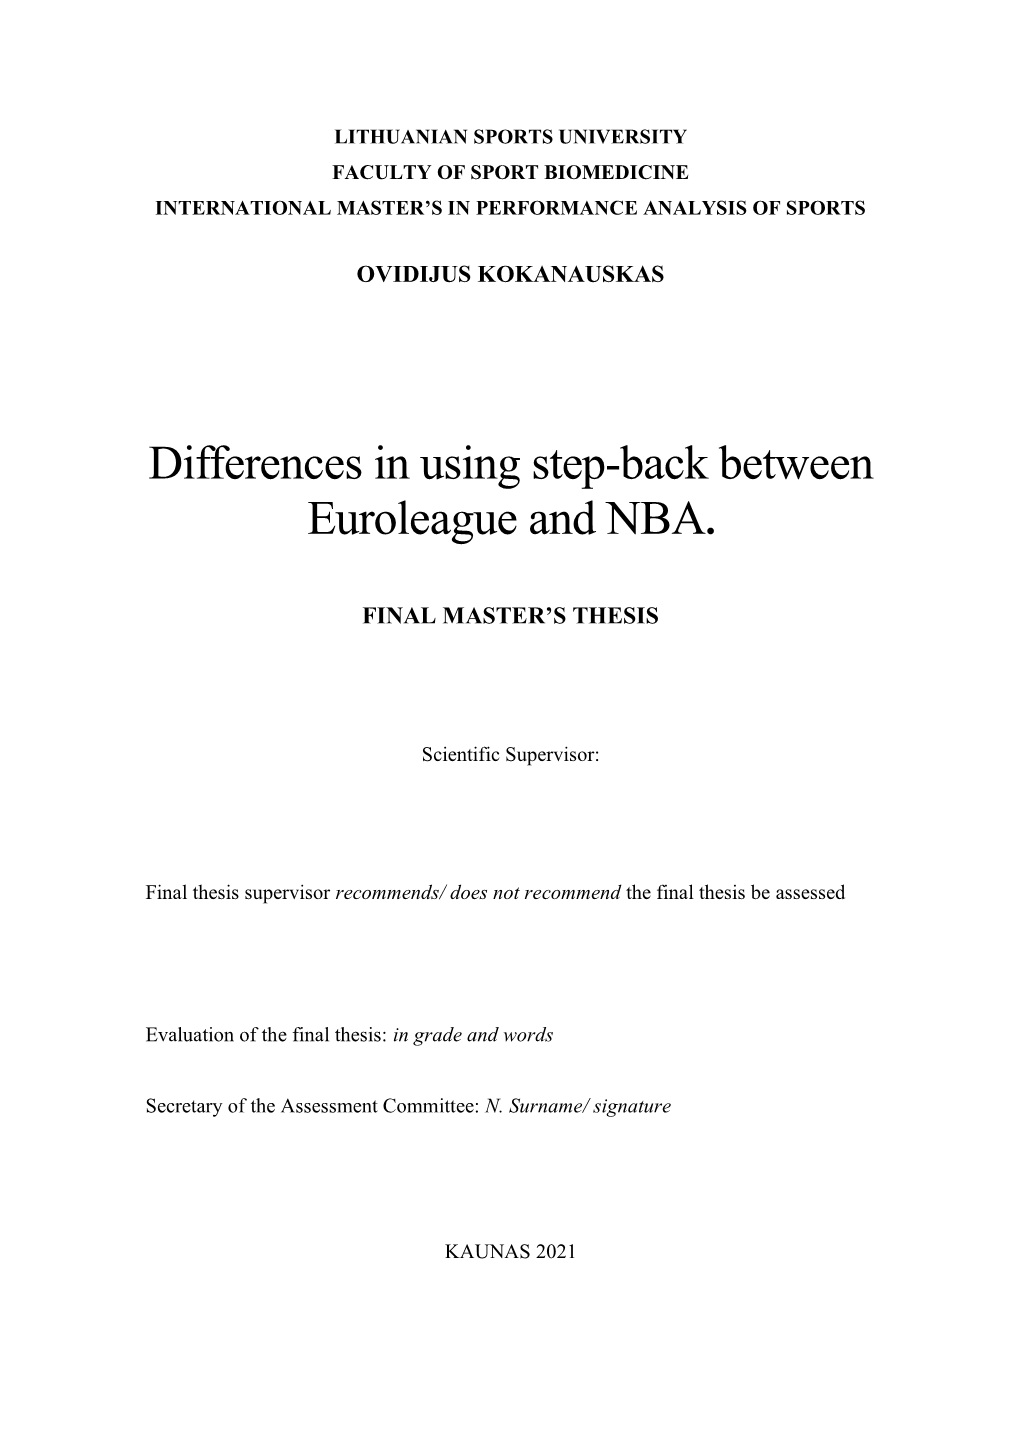 Differences in Using Step-Back Between Euroleague and NBA